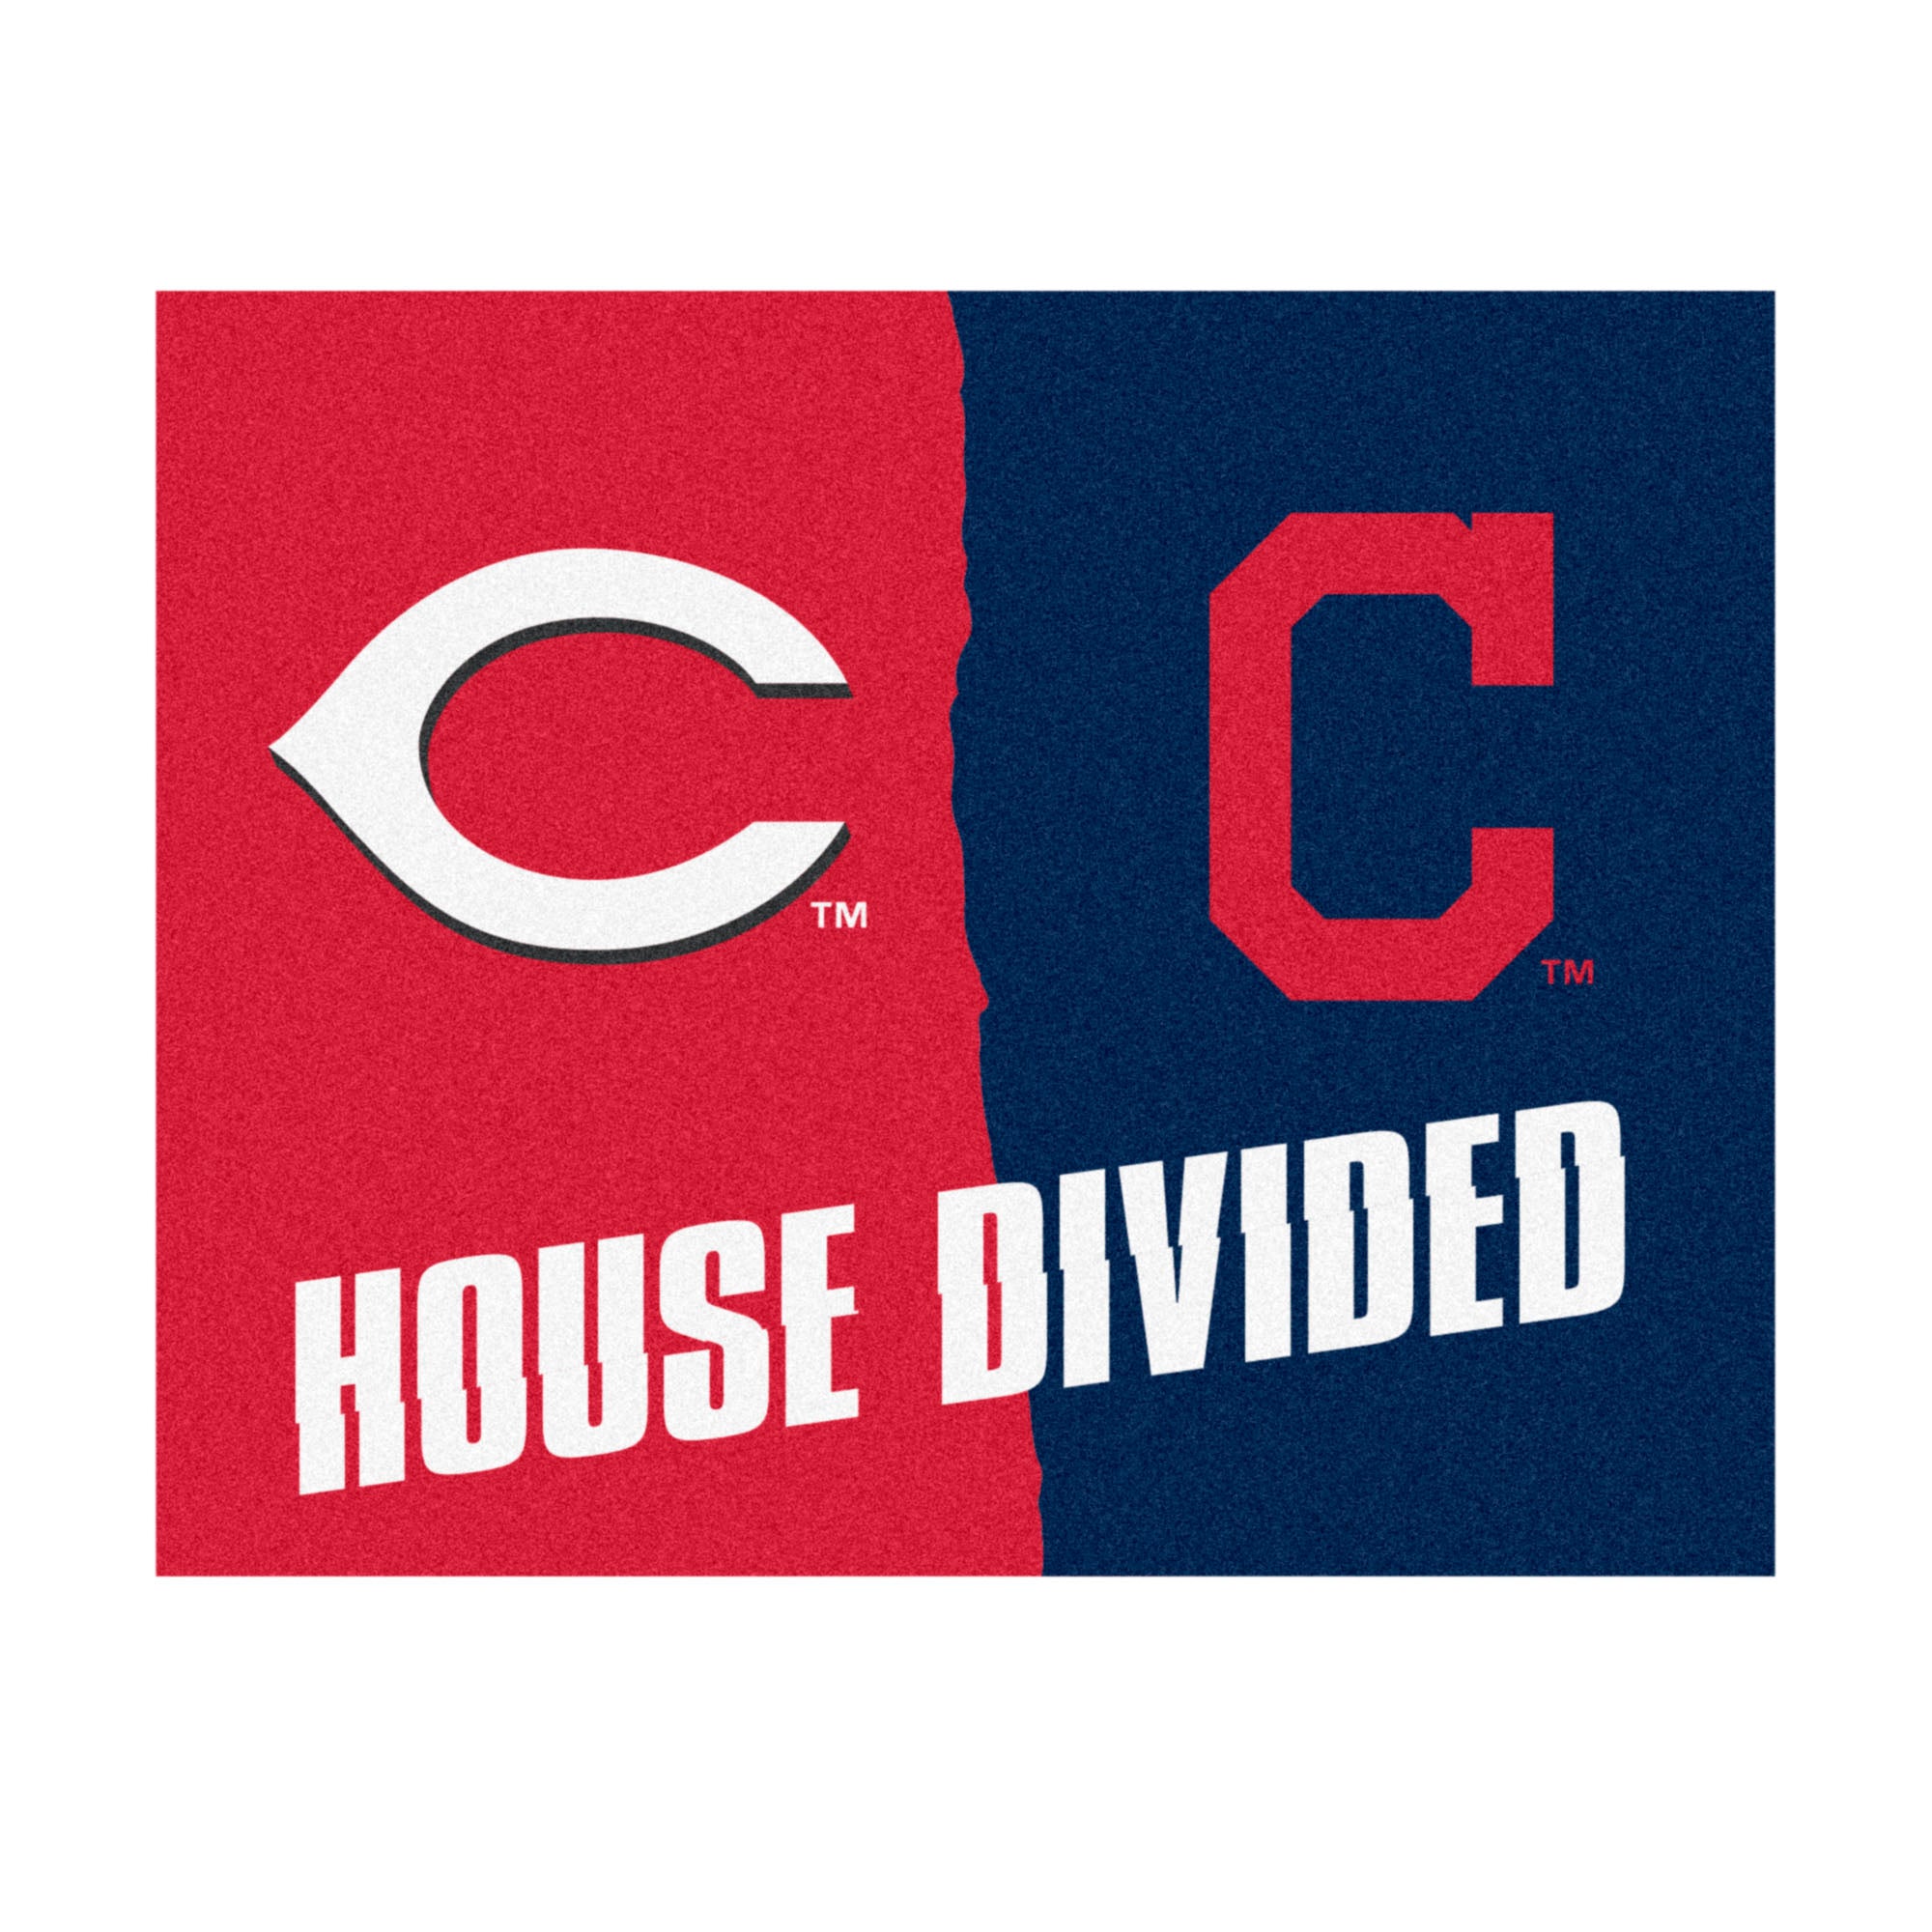 FANMATS, MLB House Divided - Reds / Indians House Divided Rug